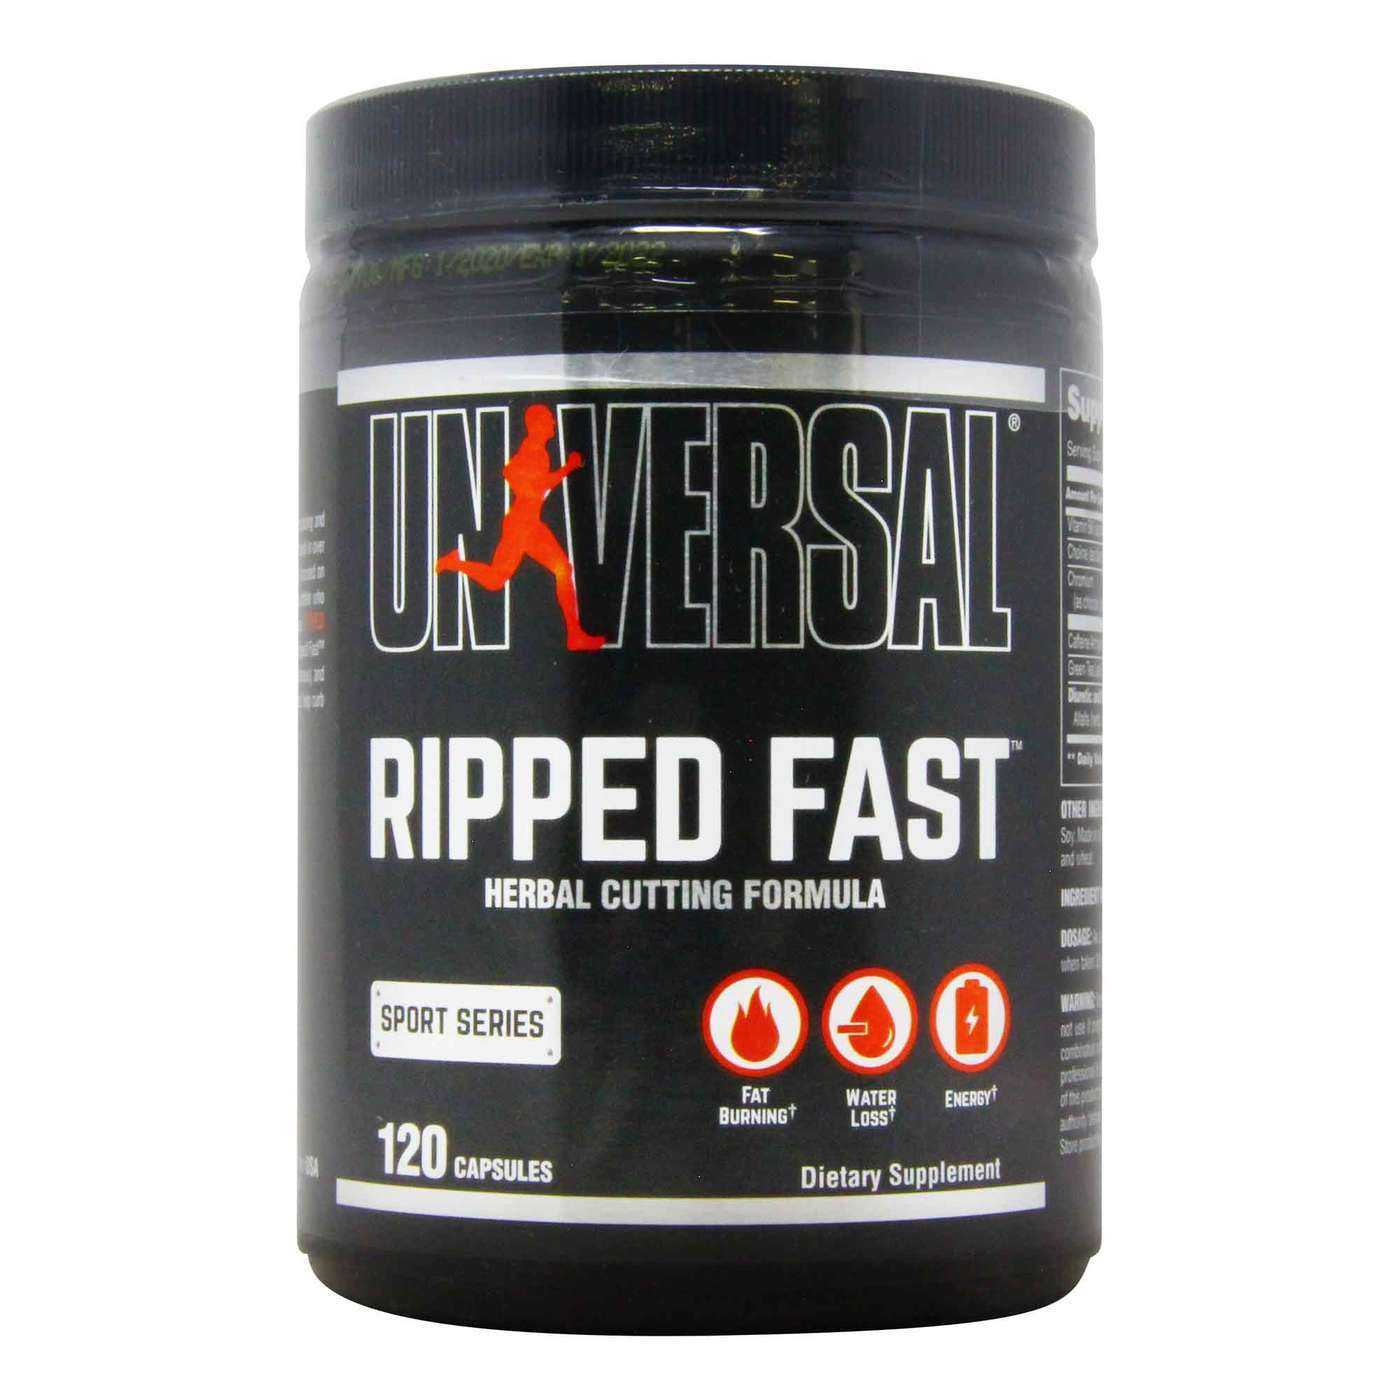 Universal Ripped fast 120 cap